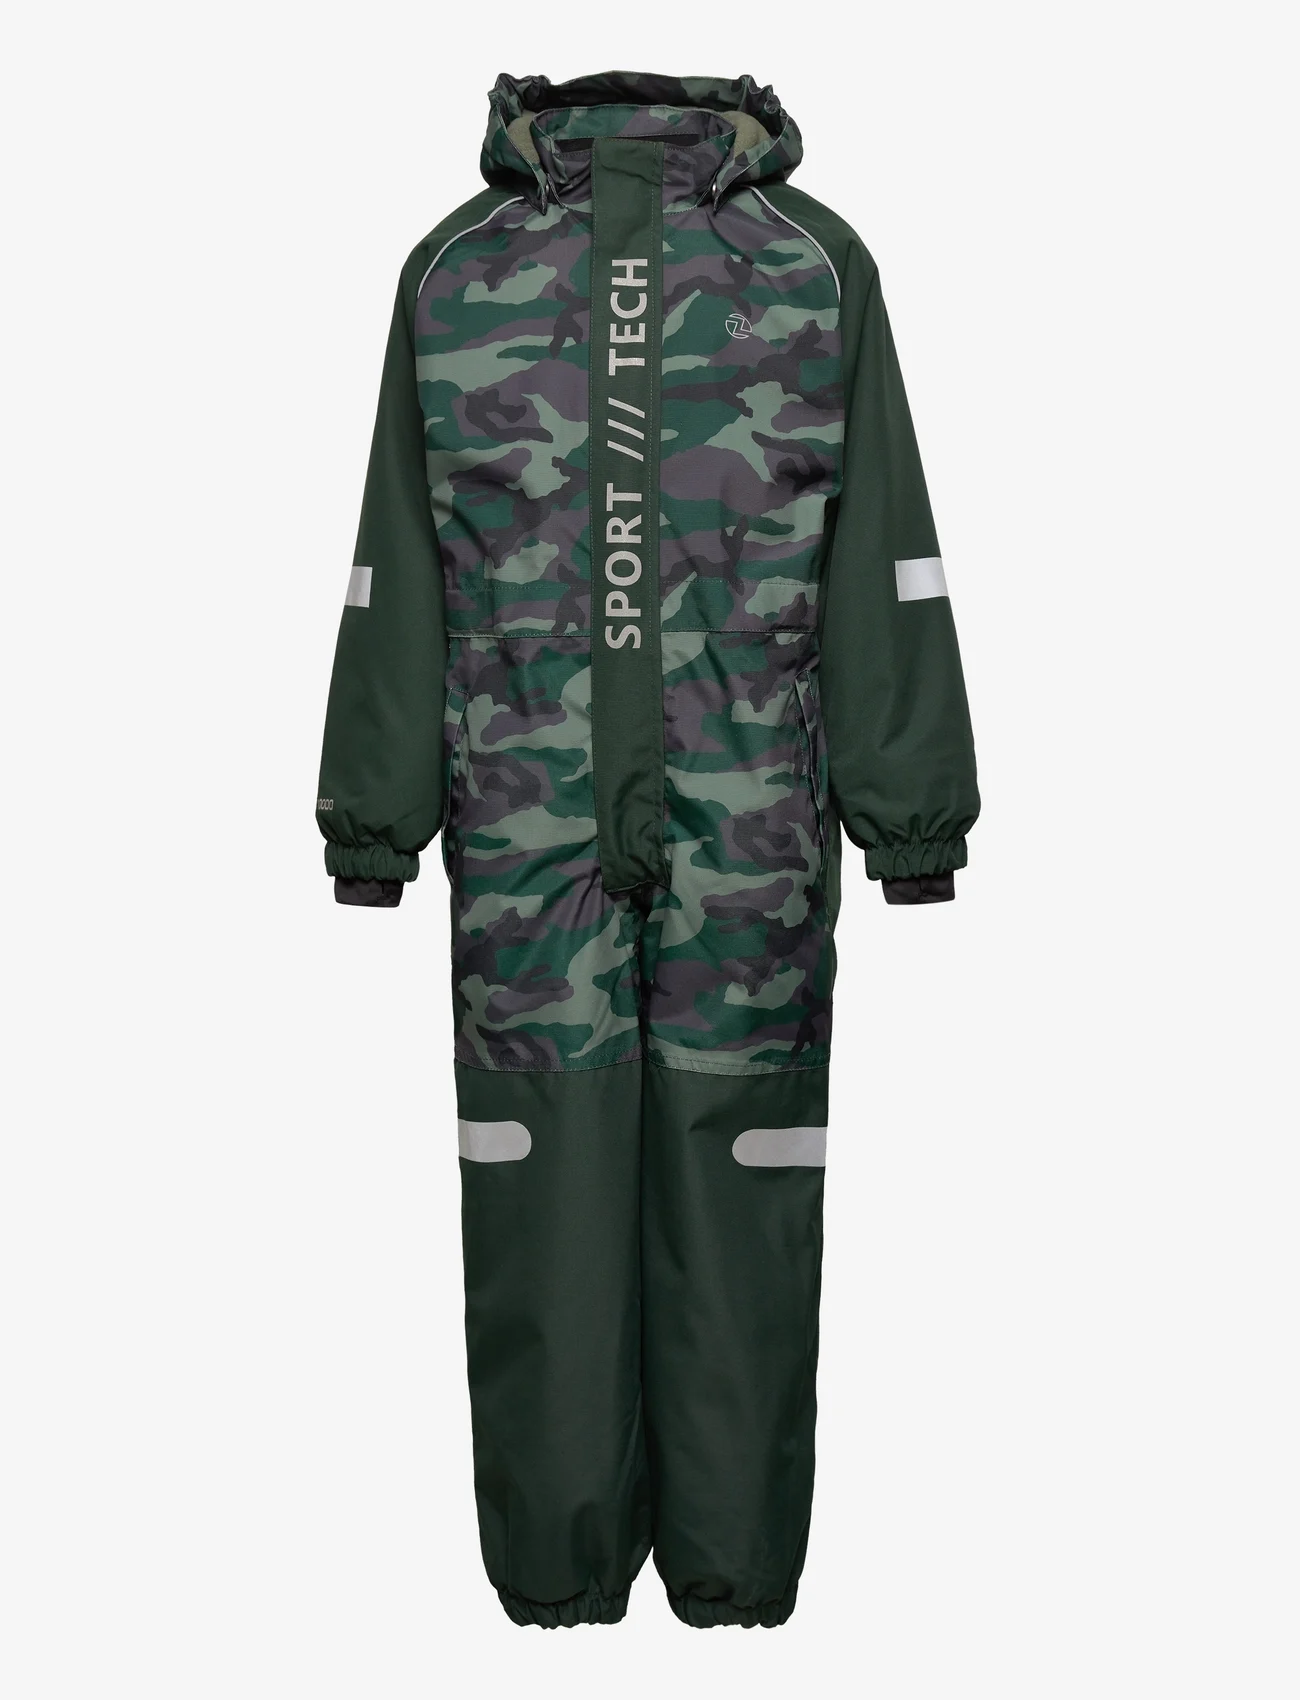 ZigZag - Kyle Printed Coverall W-PRO 10000 - skaloveraller - scarab - 0